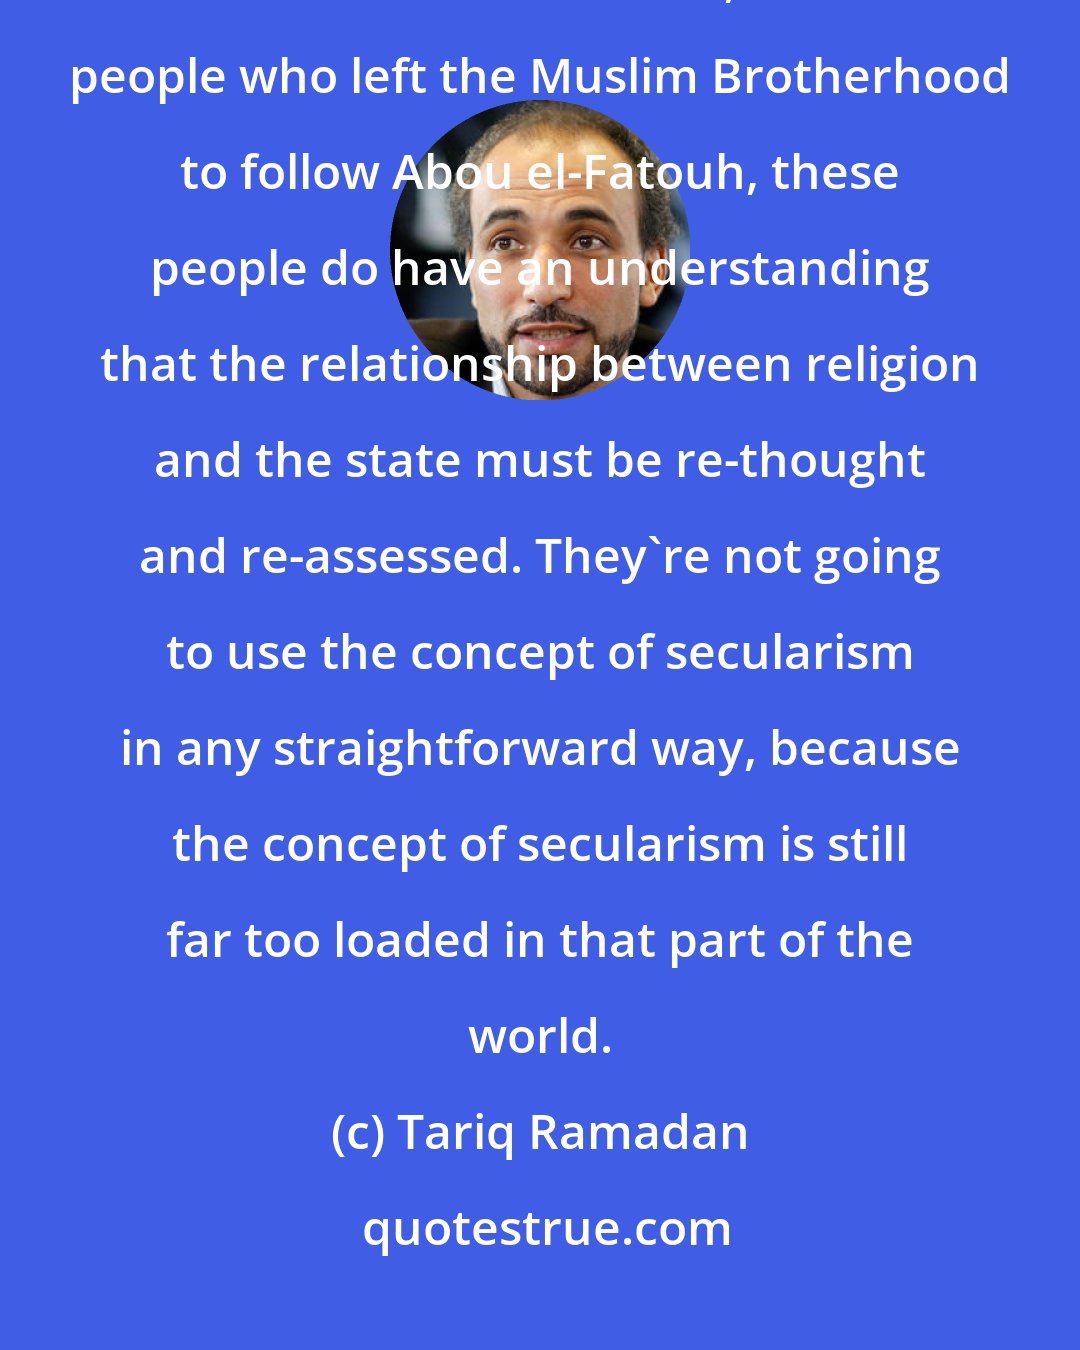 Tariq Ramadan: I think many thinkers and activists, even in the Islamist parties like the Muslim Brotherhood, and the people who left the Muslim Brotherhood to follow Abou el-Fatouh, these people do have an understanding that the relationship between religion and the state must be re-thought and re-assessed. They're not going to use the concept of secularism in any straightforward way, because the concept of secularism is still far too loaded in that part of the world.